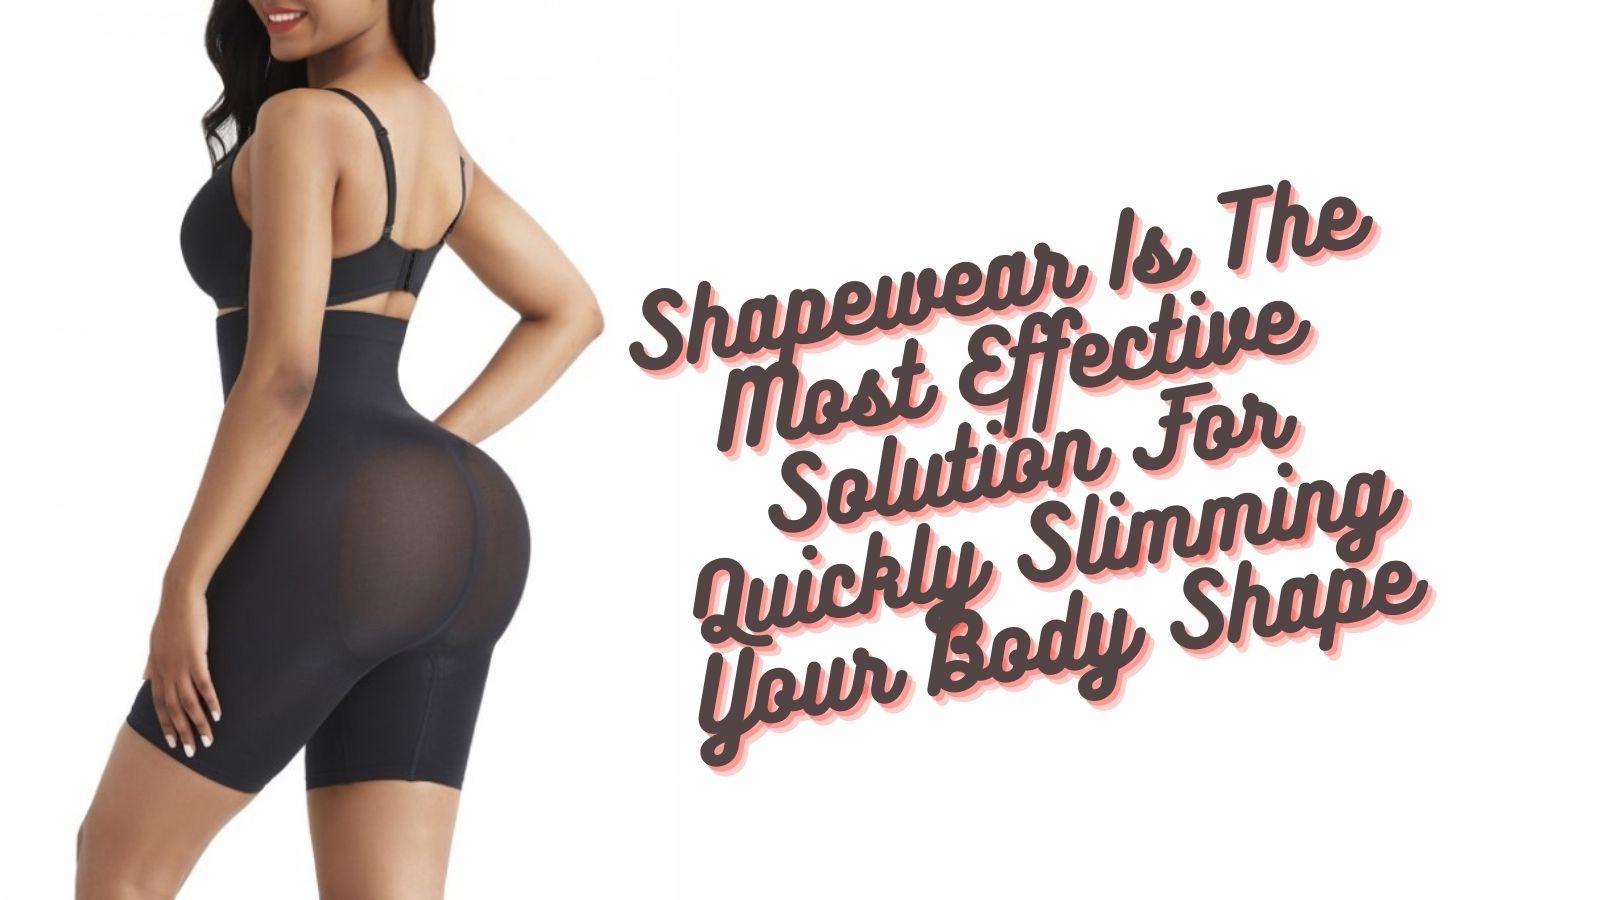 Shapewear Is The Most Effective Solution For Quickly Slimming Your Body Shape